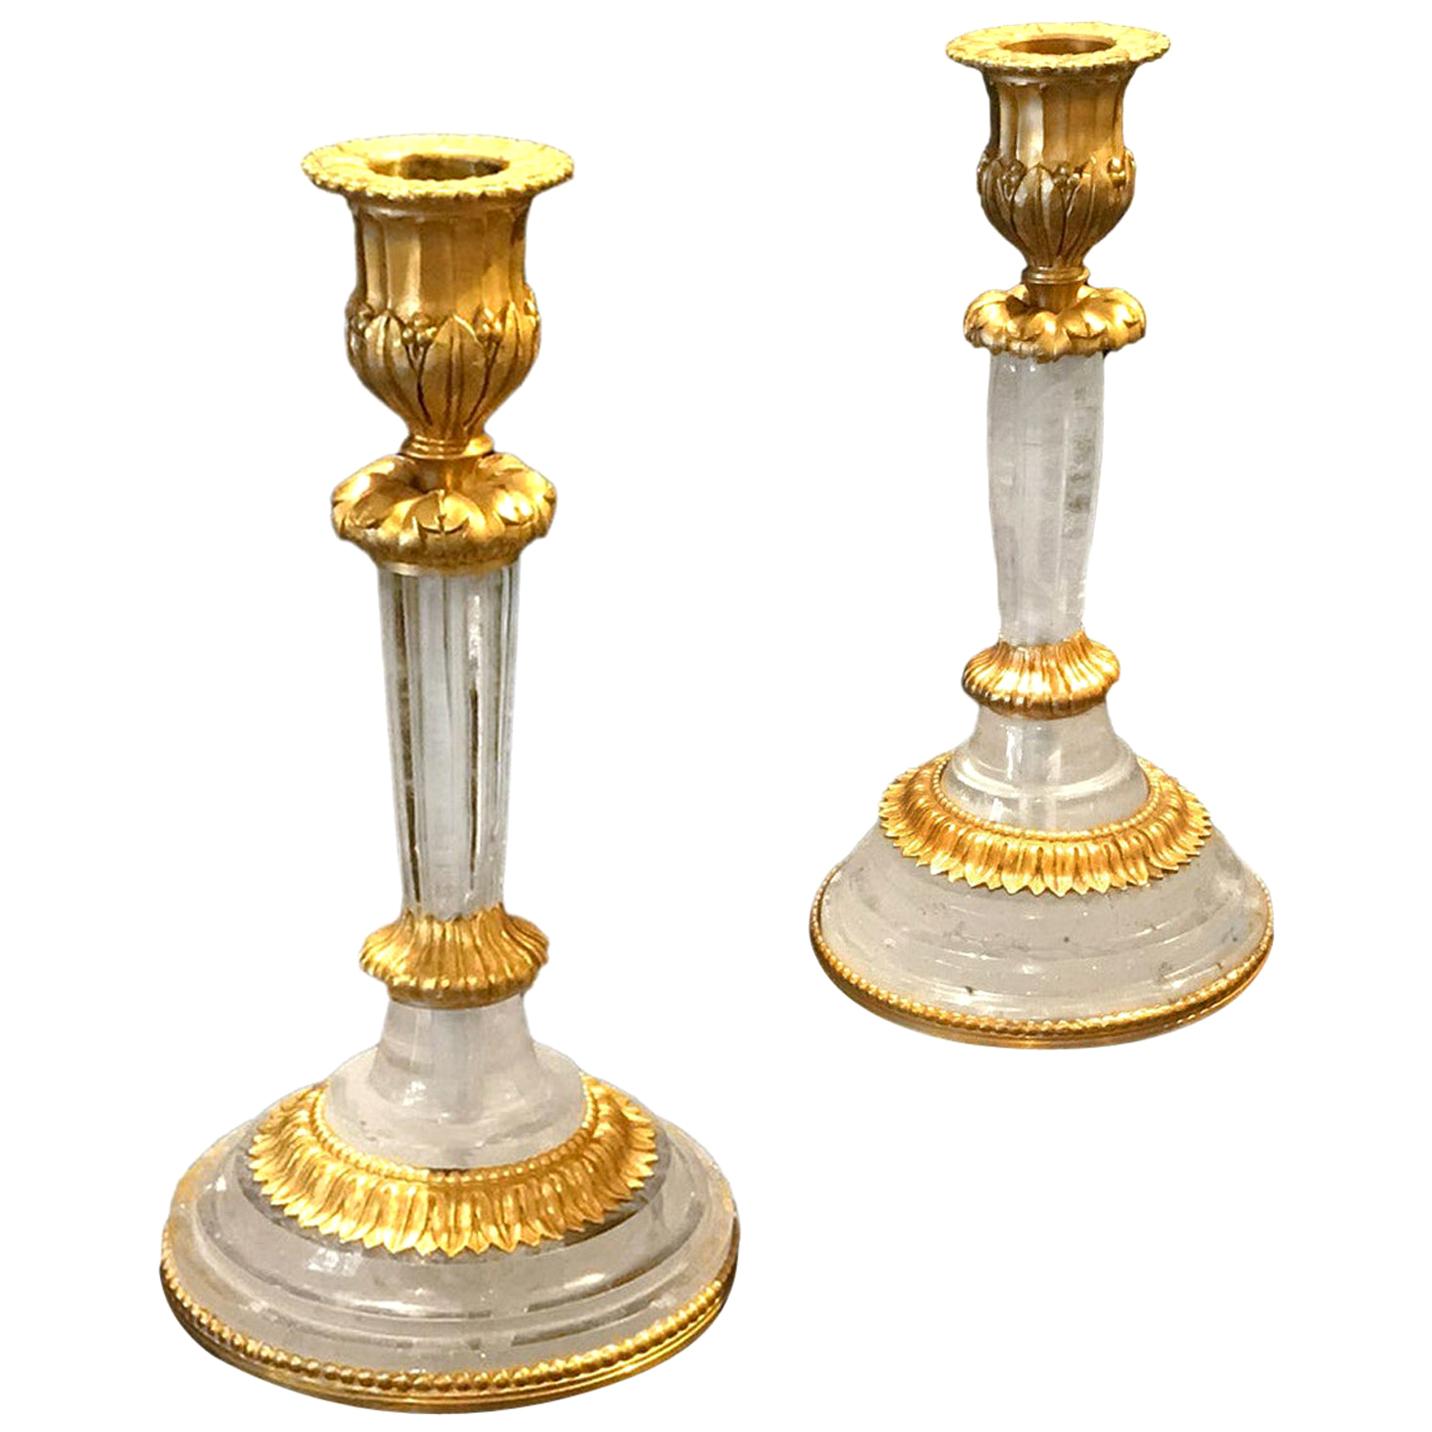 Candlestick Rock Crystal and Gilt Bronze the Pair, 18th Century Style